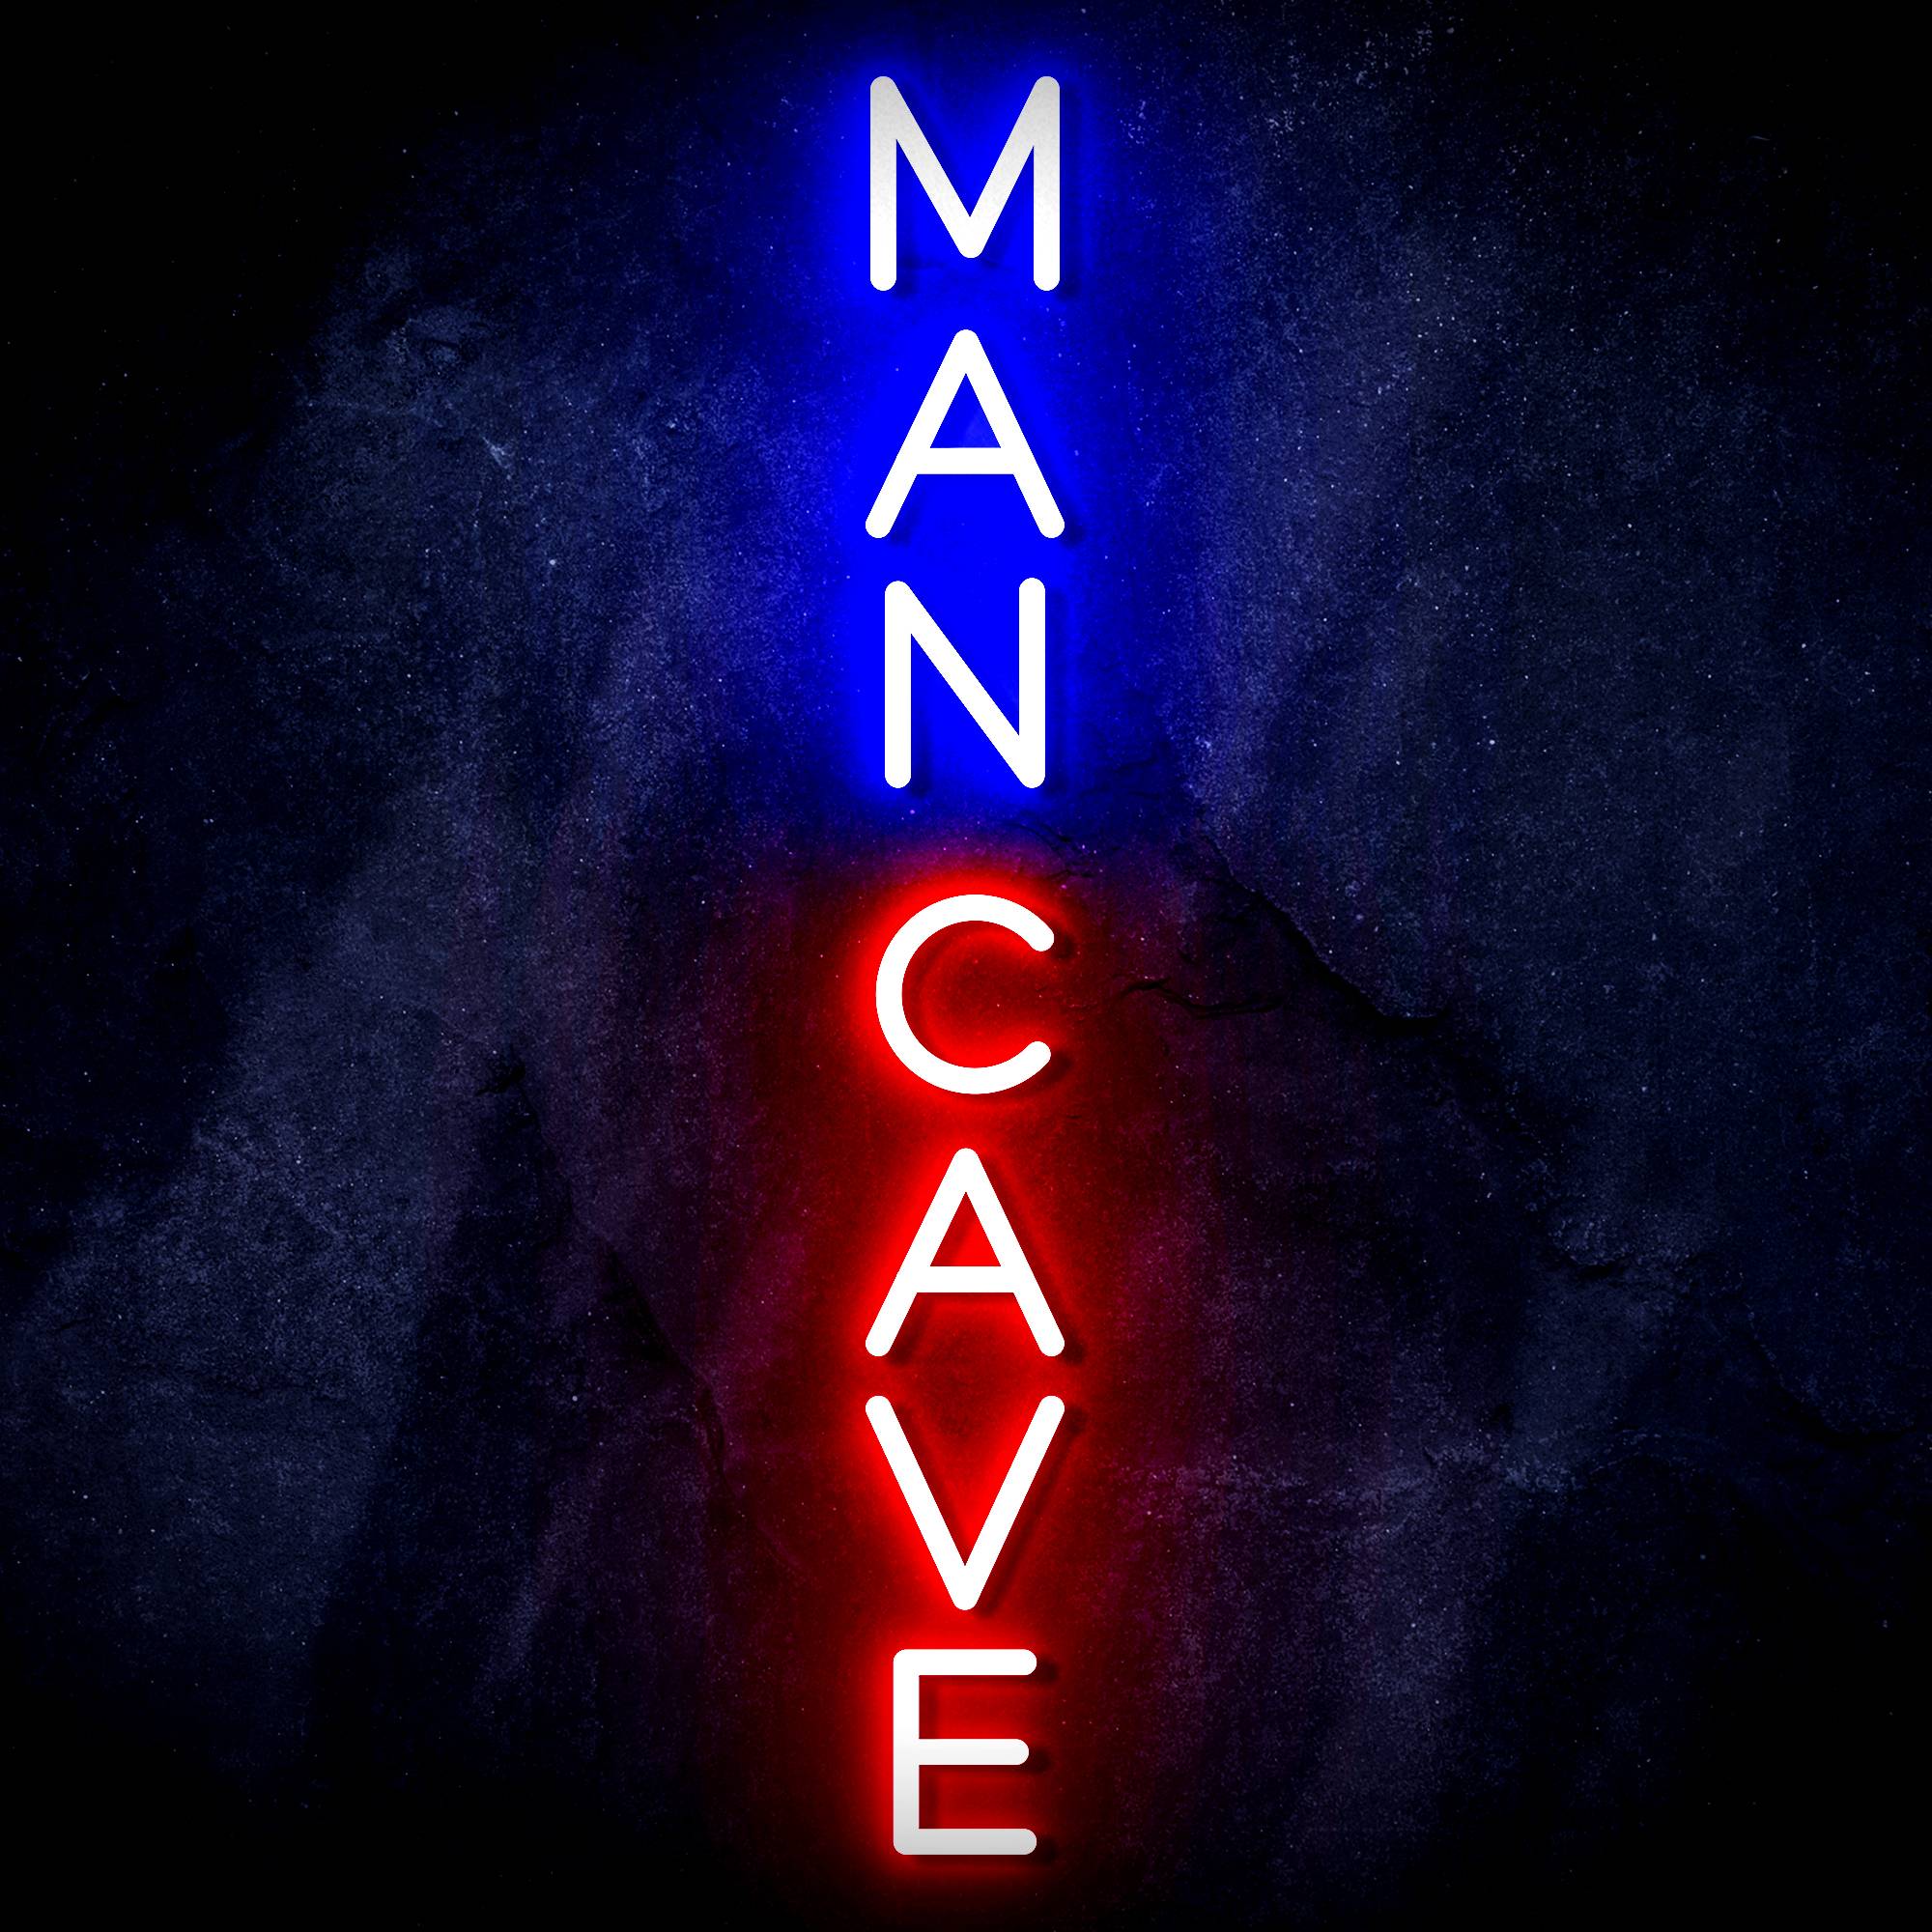 "MAN CAVE" Vertical Text Quote LED Neon Sign